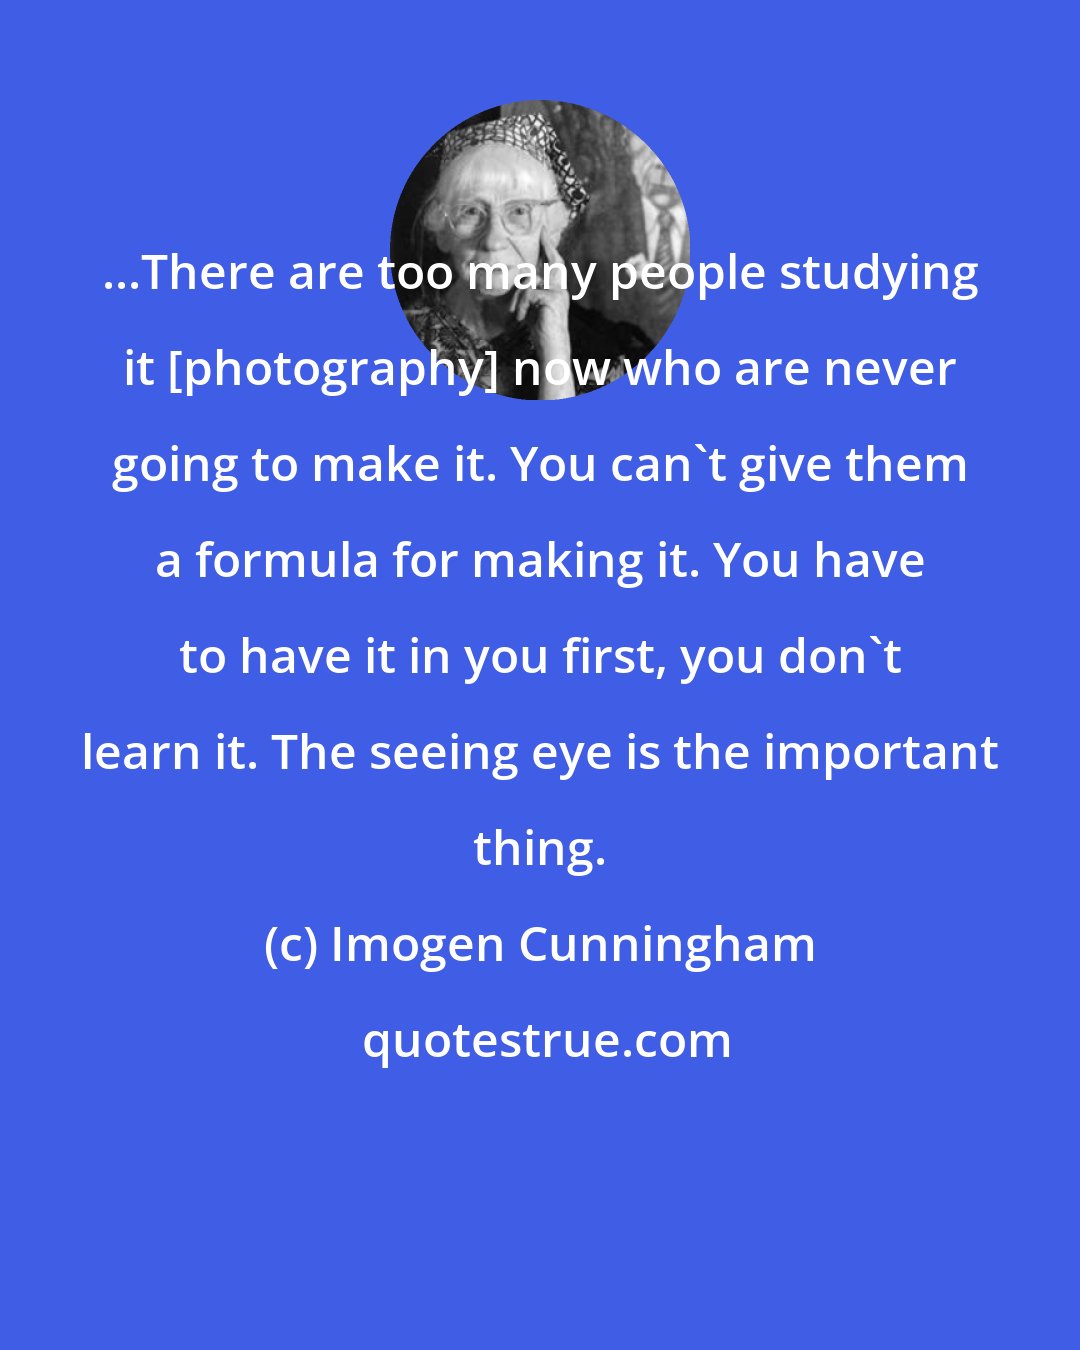 Imogen Cunningham: ...There are too many people studying it [photography] now who are never going to make it. You can't give them a formula for making it. You have to have it in you first, you don't learn it. The seeing eye is the important thing.